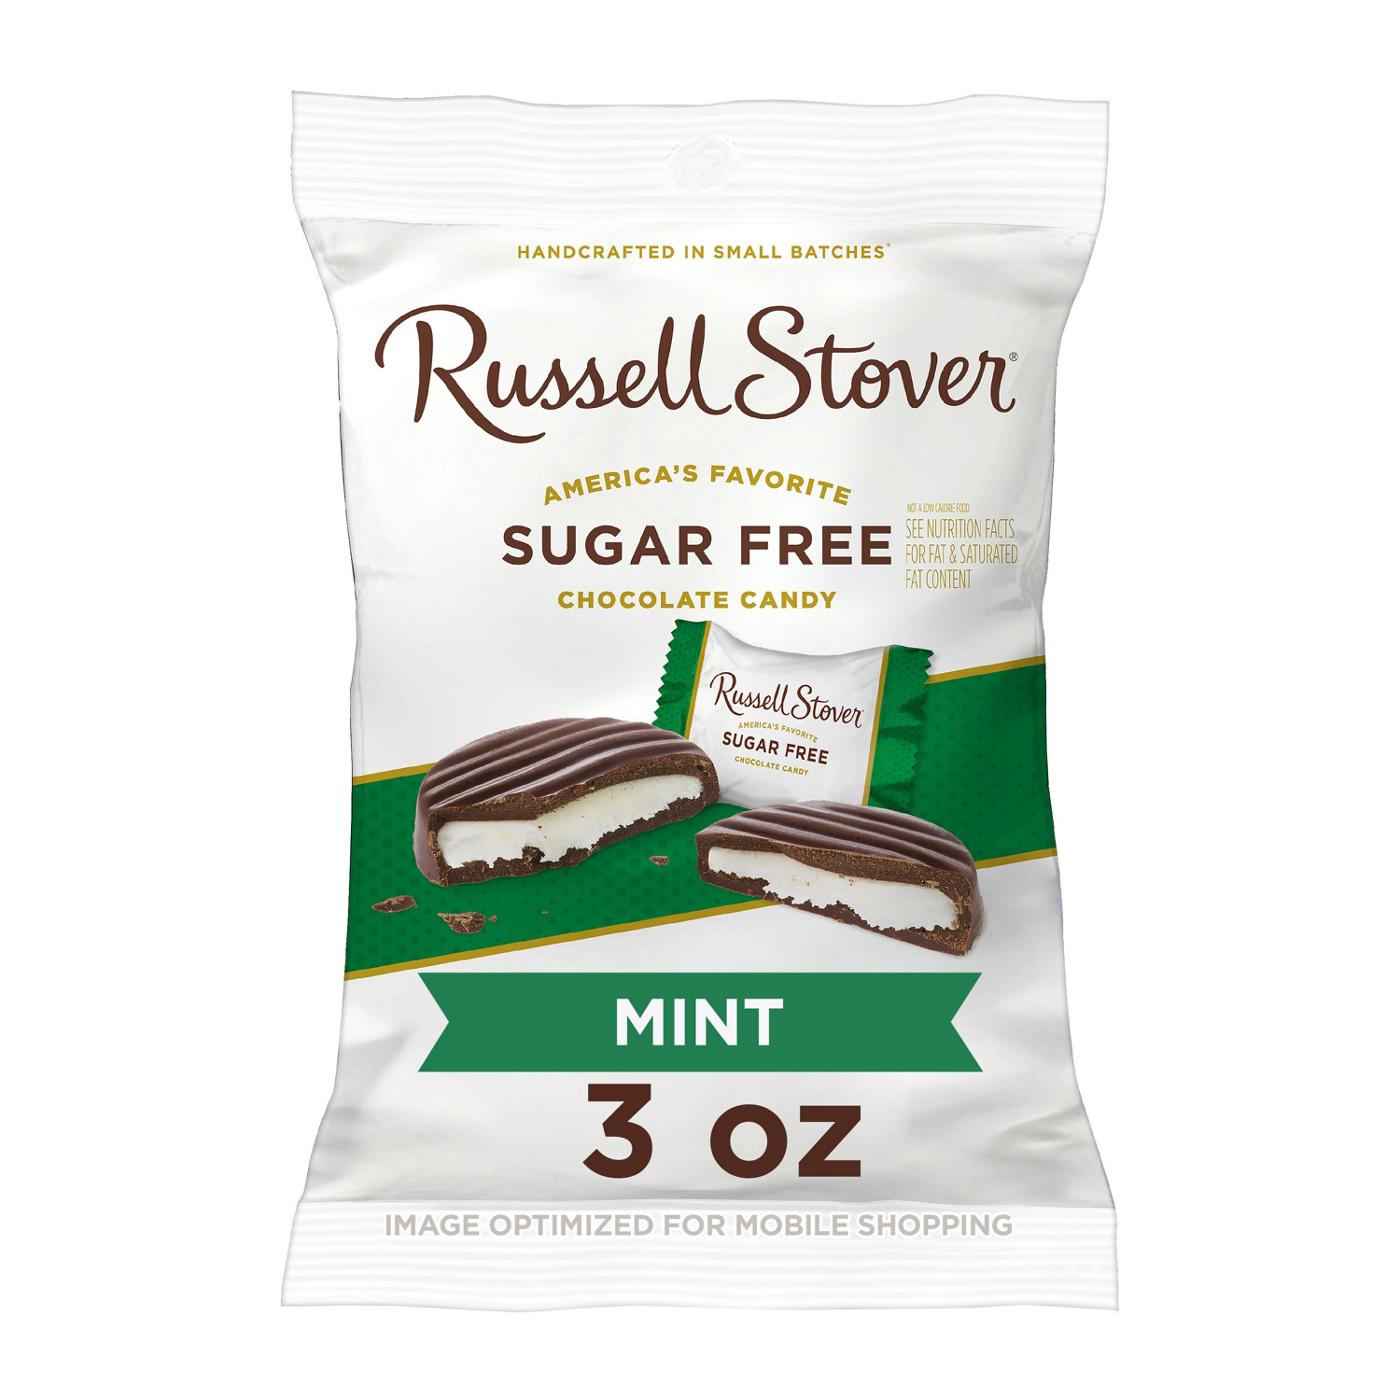 Russell Stover Sugar Free Mint Patties; image 1 of 8